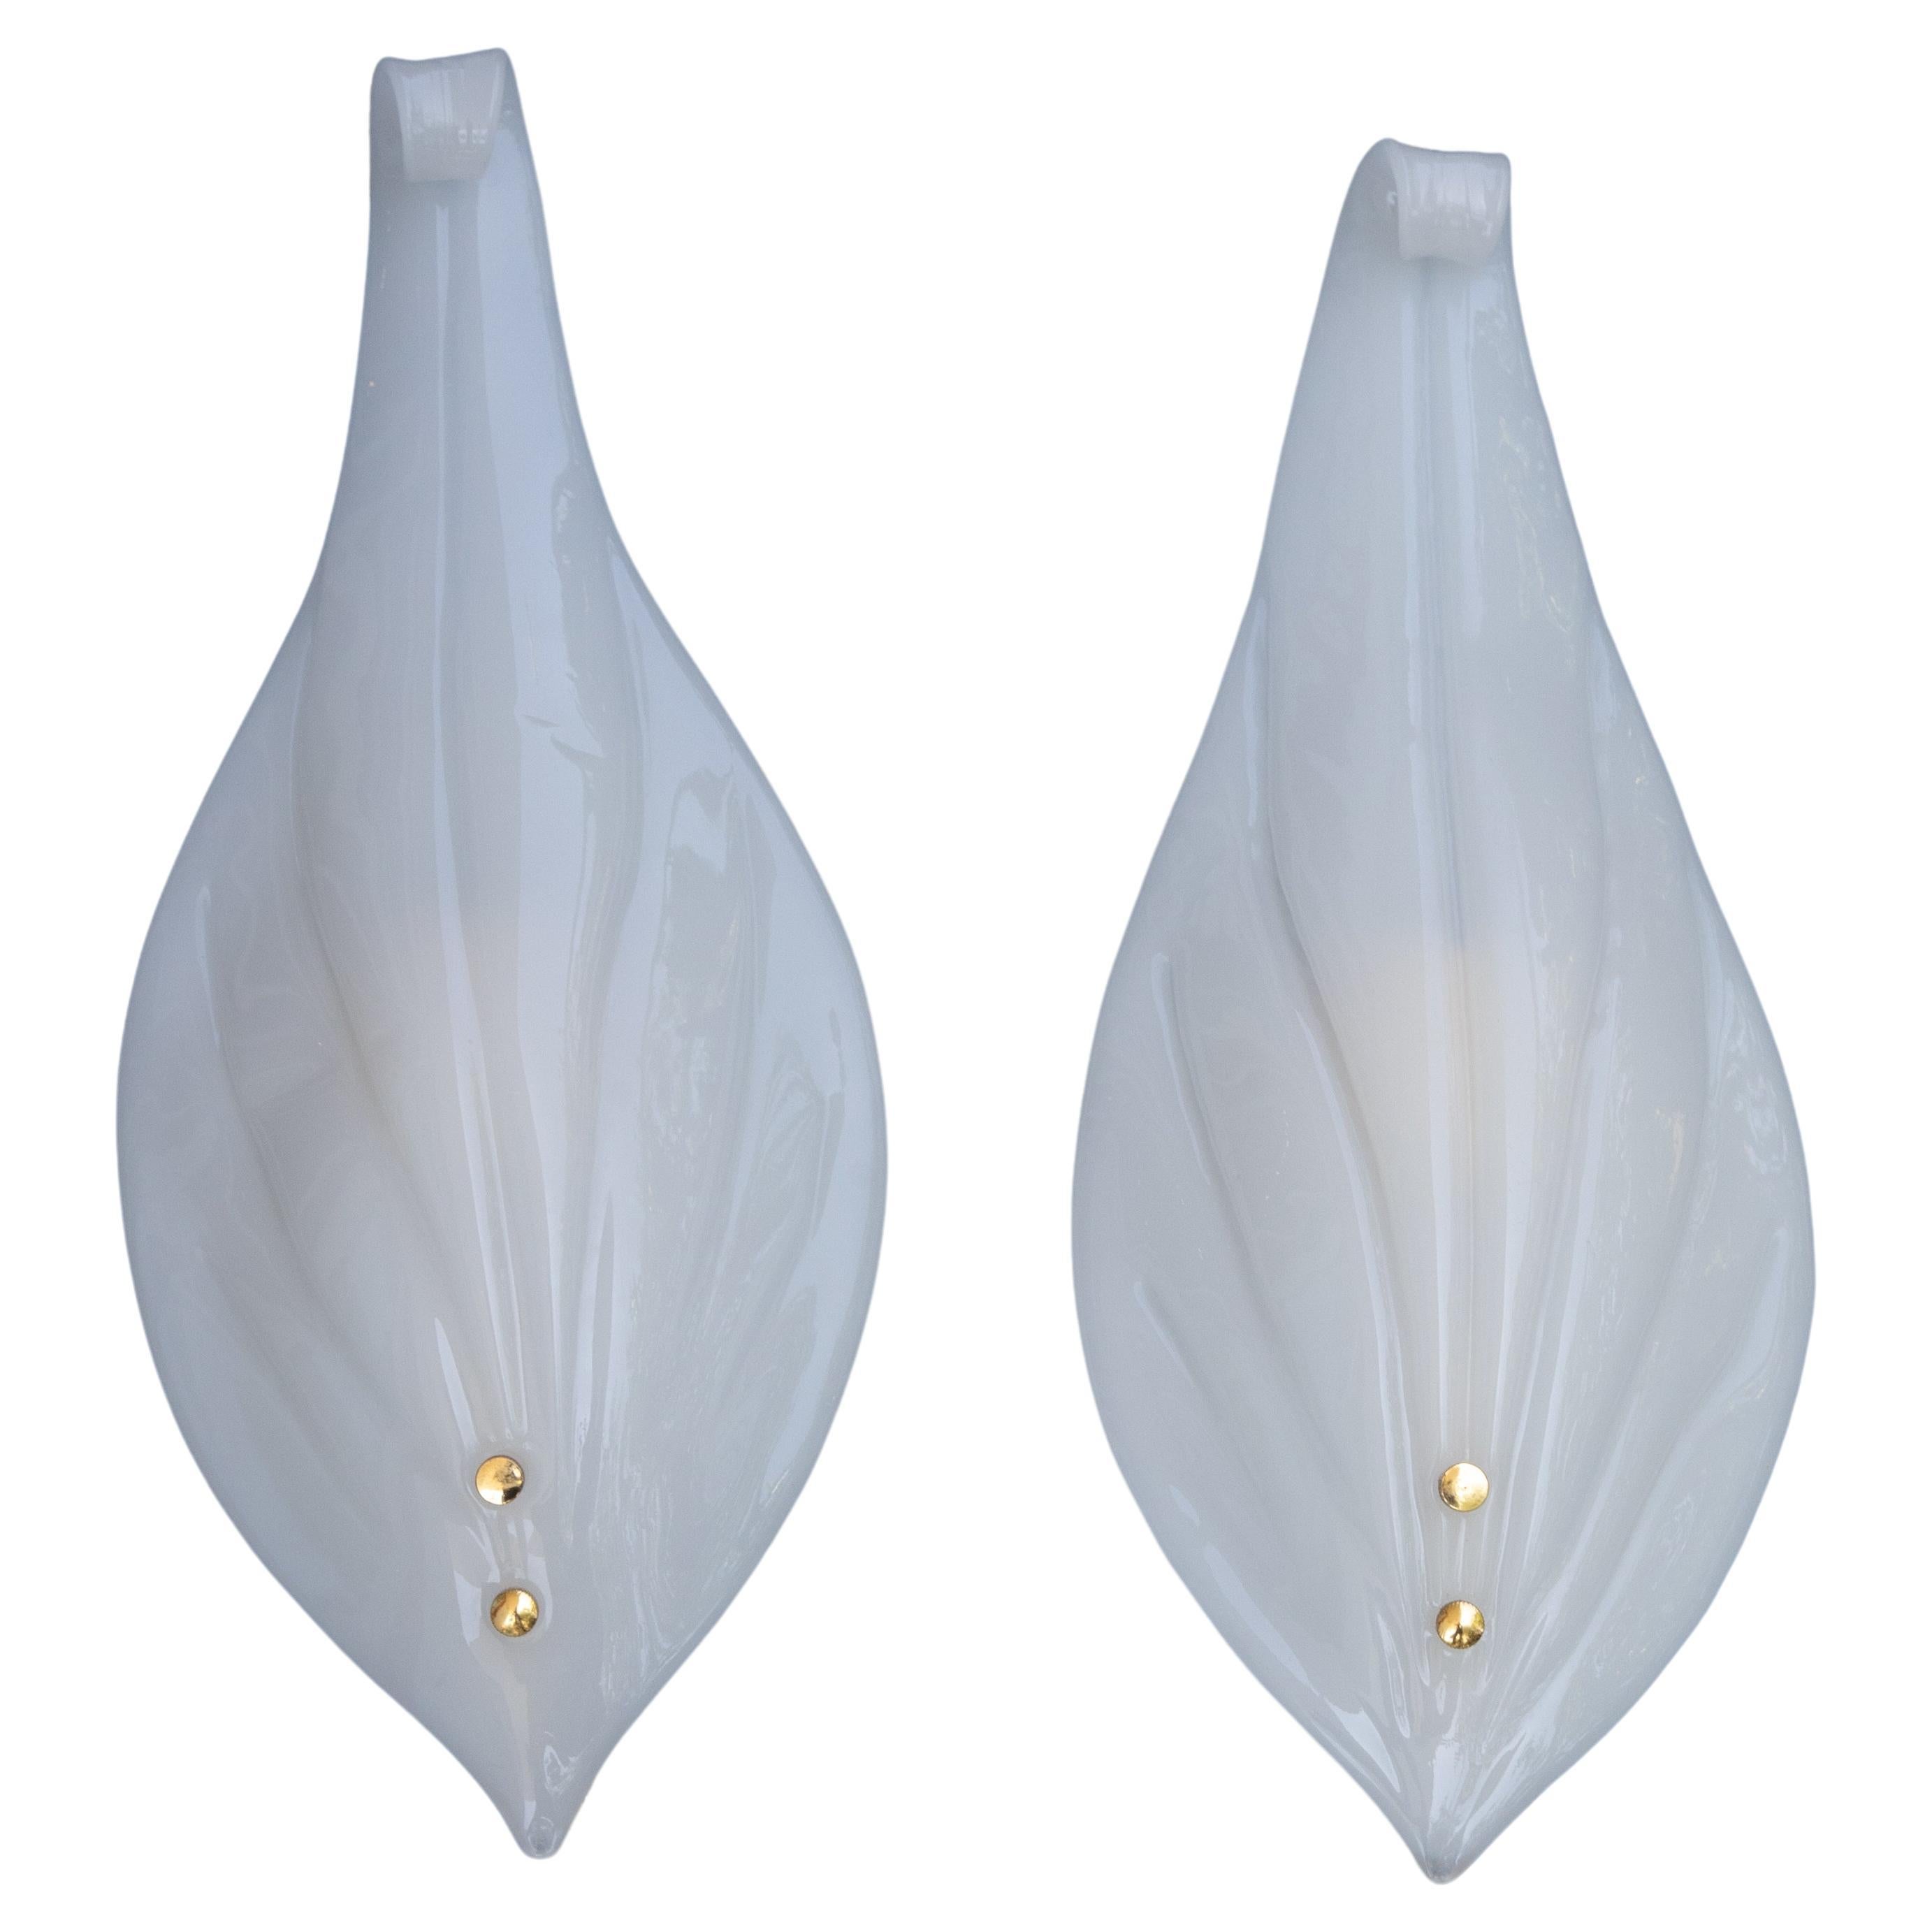 Pair of Vintage Italian Murano Glass Wall Sconces, White, 1970 For Sale